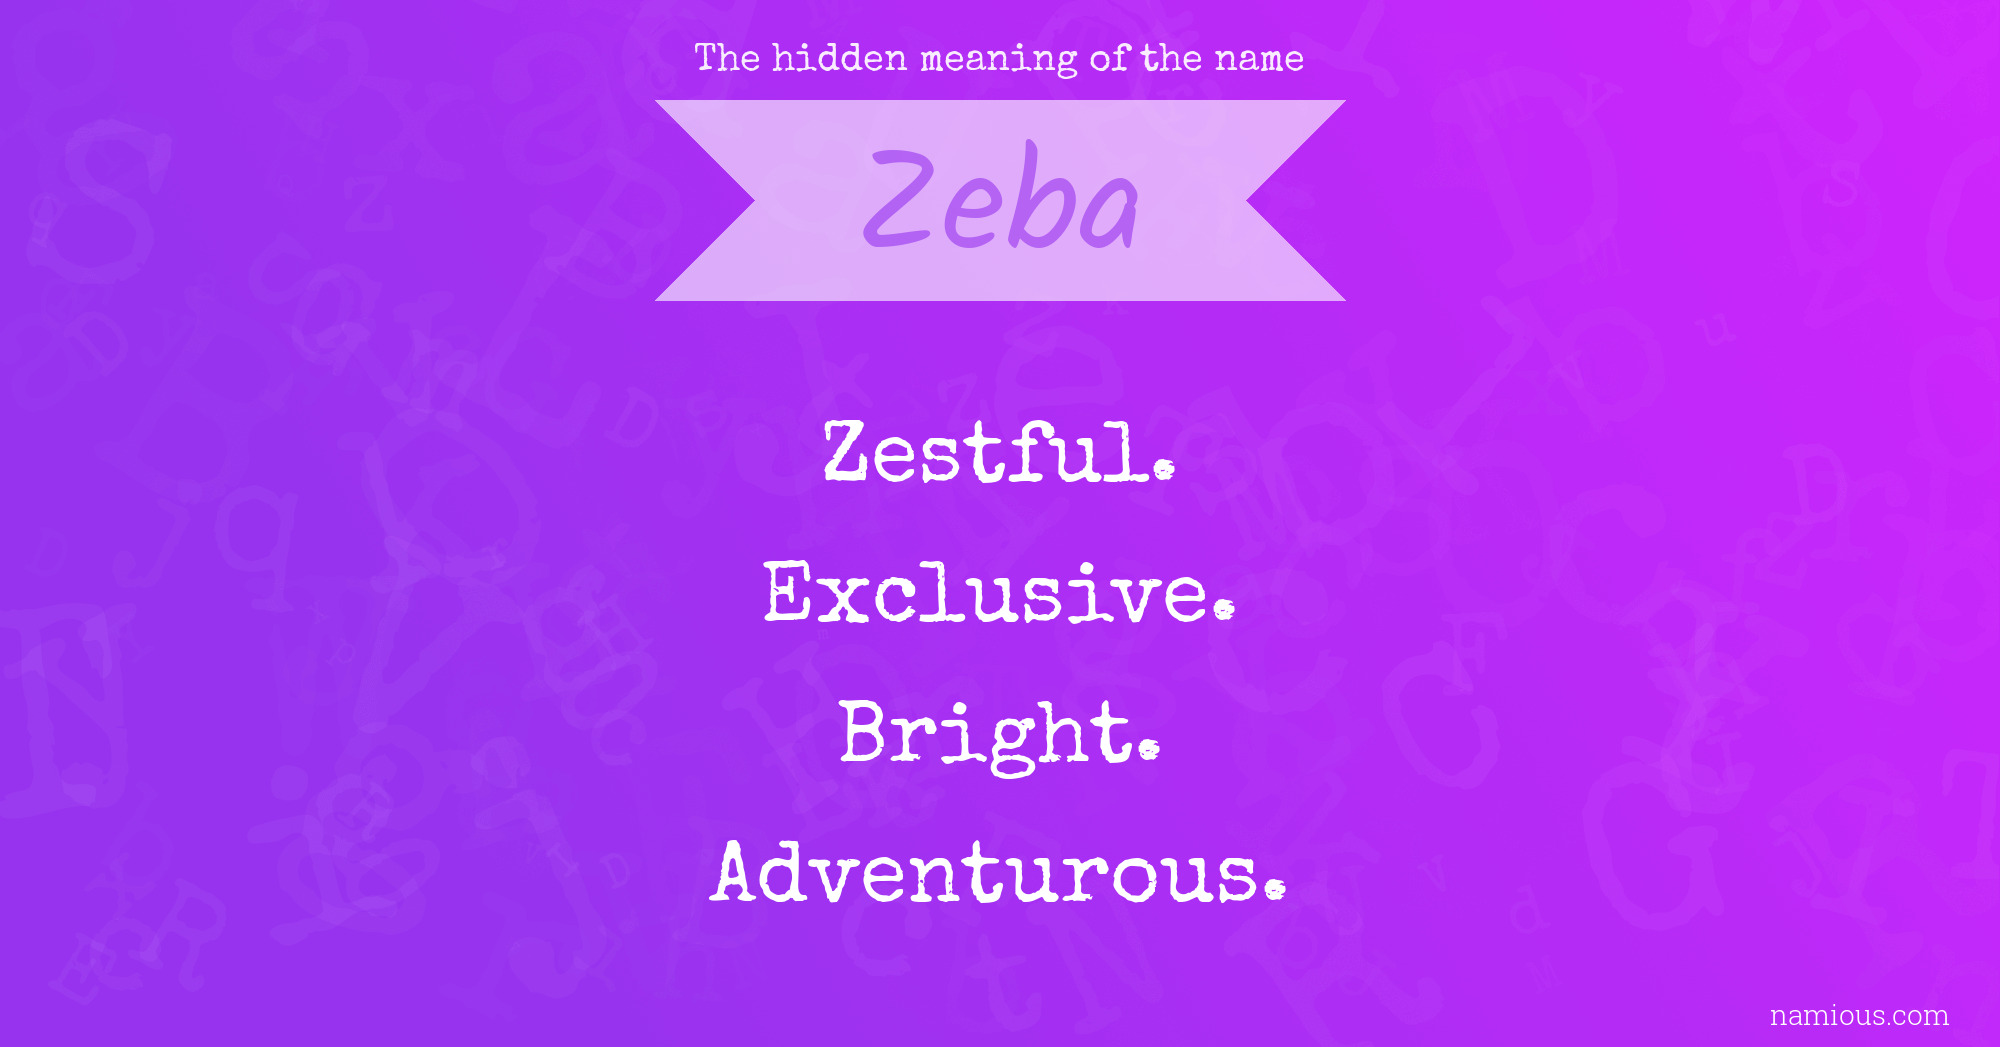 The hidden meaning of the name Zeba